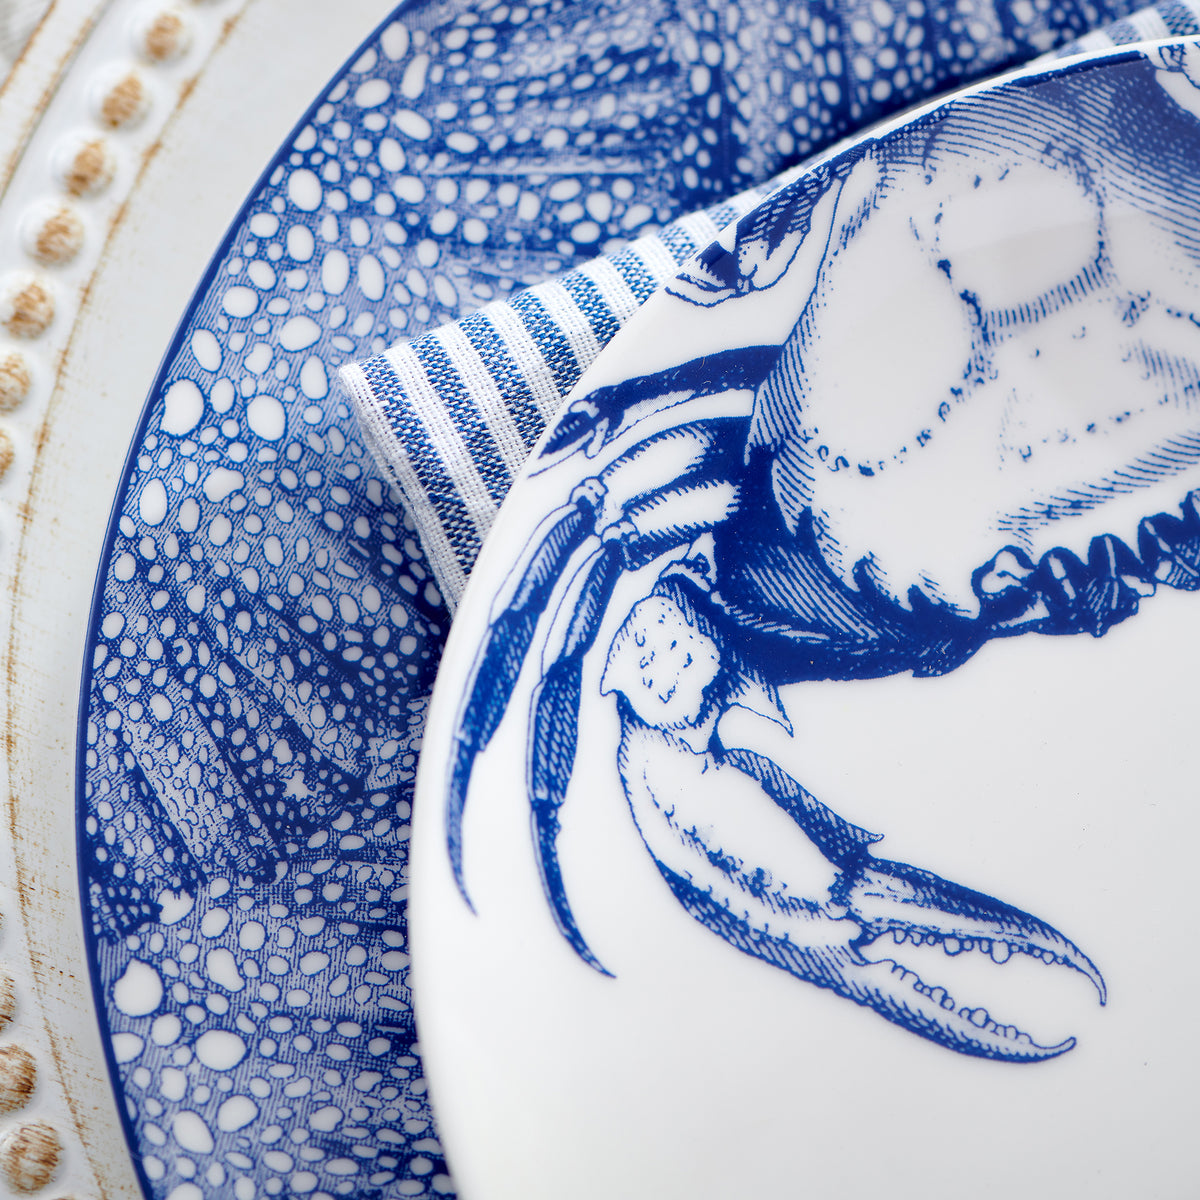 Close-up of a blue and white Crab Coupe Salad Plate by Caskata Artisanal Home featuring a crab pattern, styled with a striped napkin and placed on a decorative plate with a textured edge.